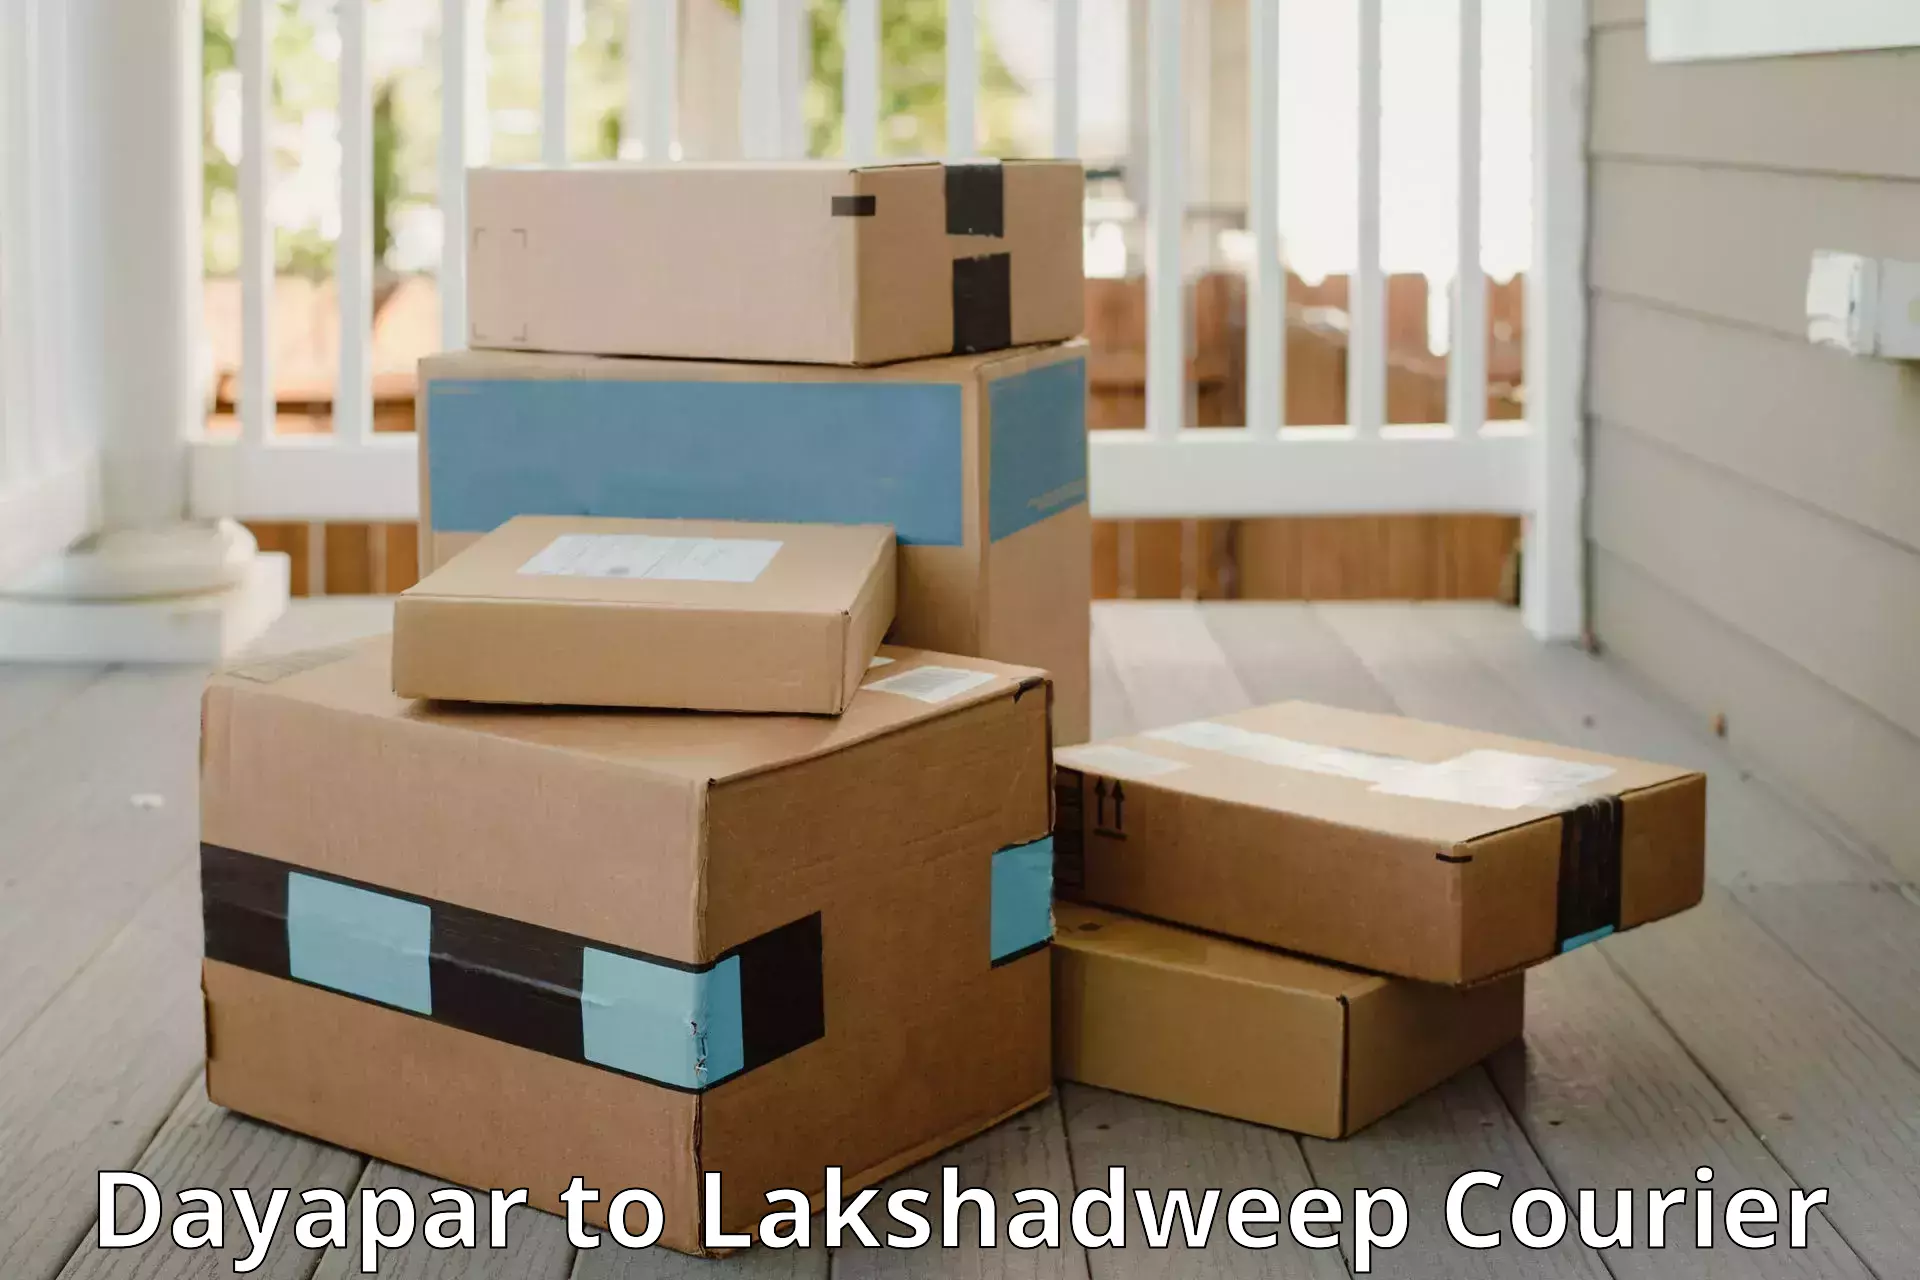 Luggage delivery system Dayapar to Lakshadweep